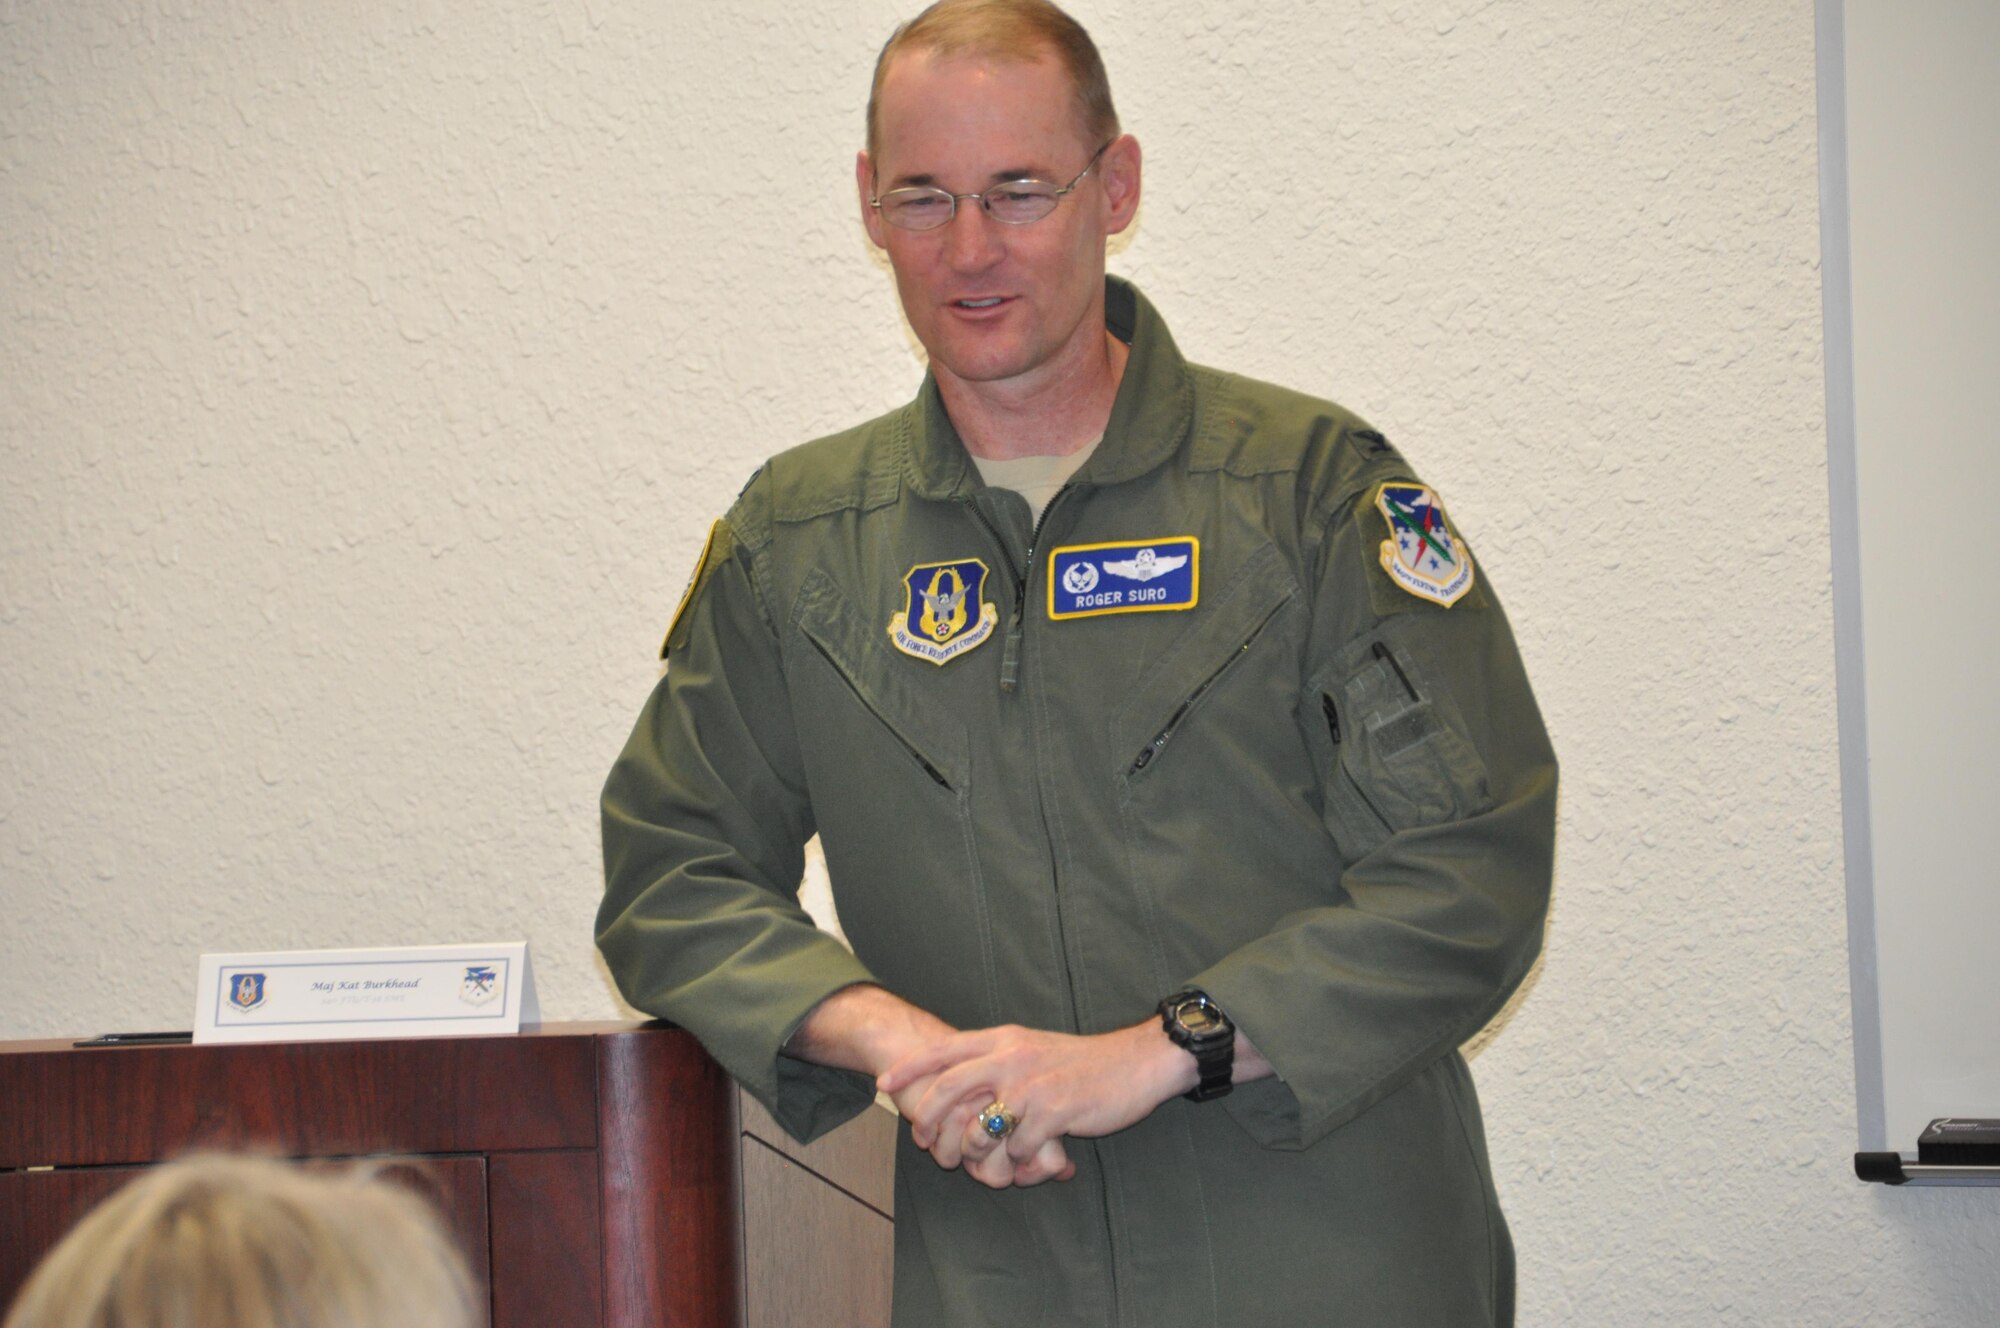 Col. Roger Suro, 340th Flying Training Group commander, delivers opening remarks during the Groups' 2016 annual fall commanders summit at Joint Base San Antonio-Randolph, Texas. Photo by Janis El Shabazz.